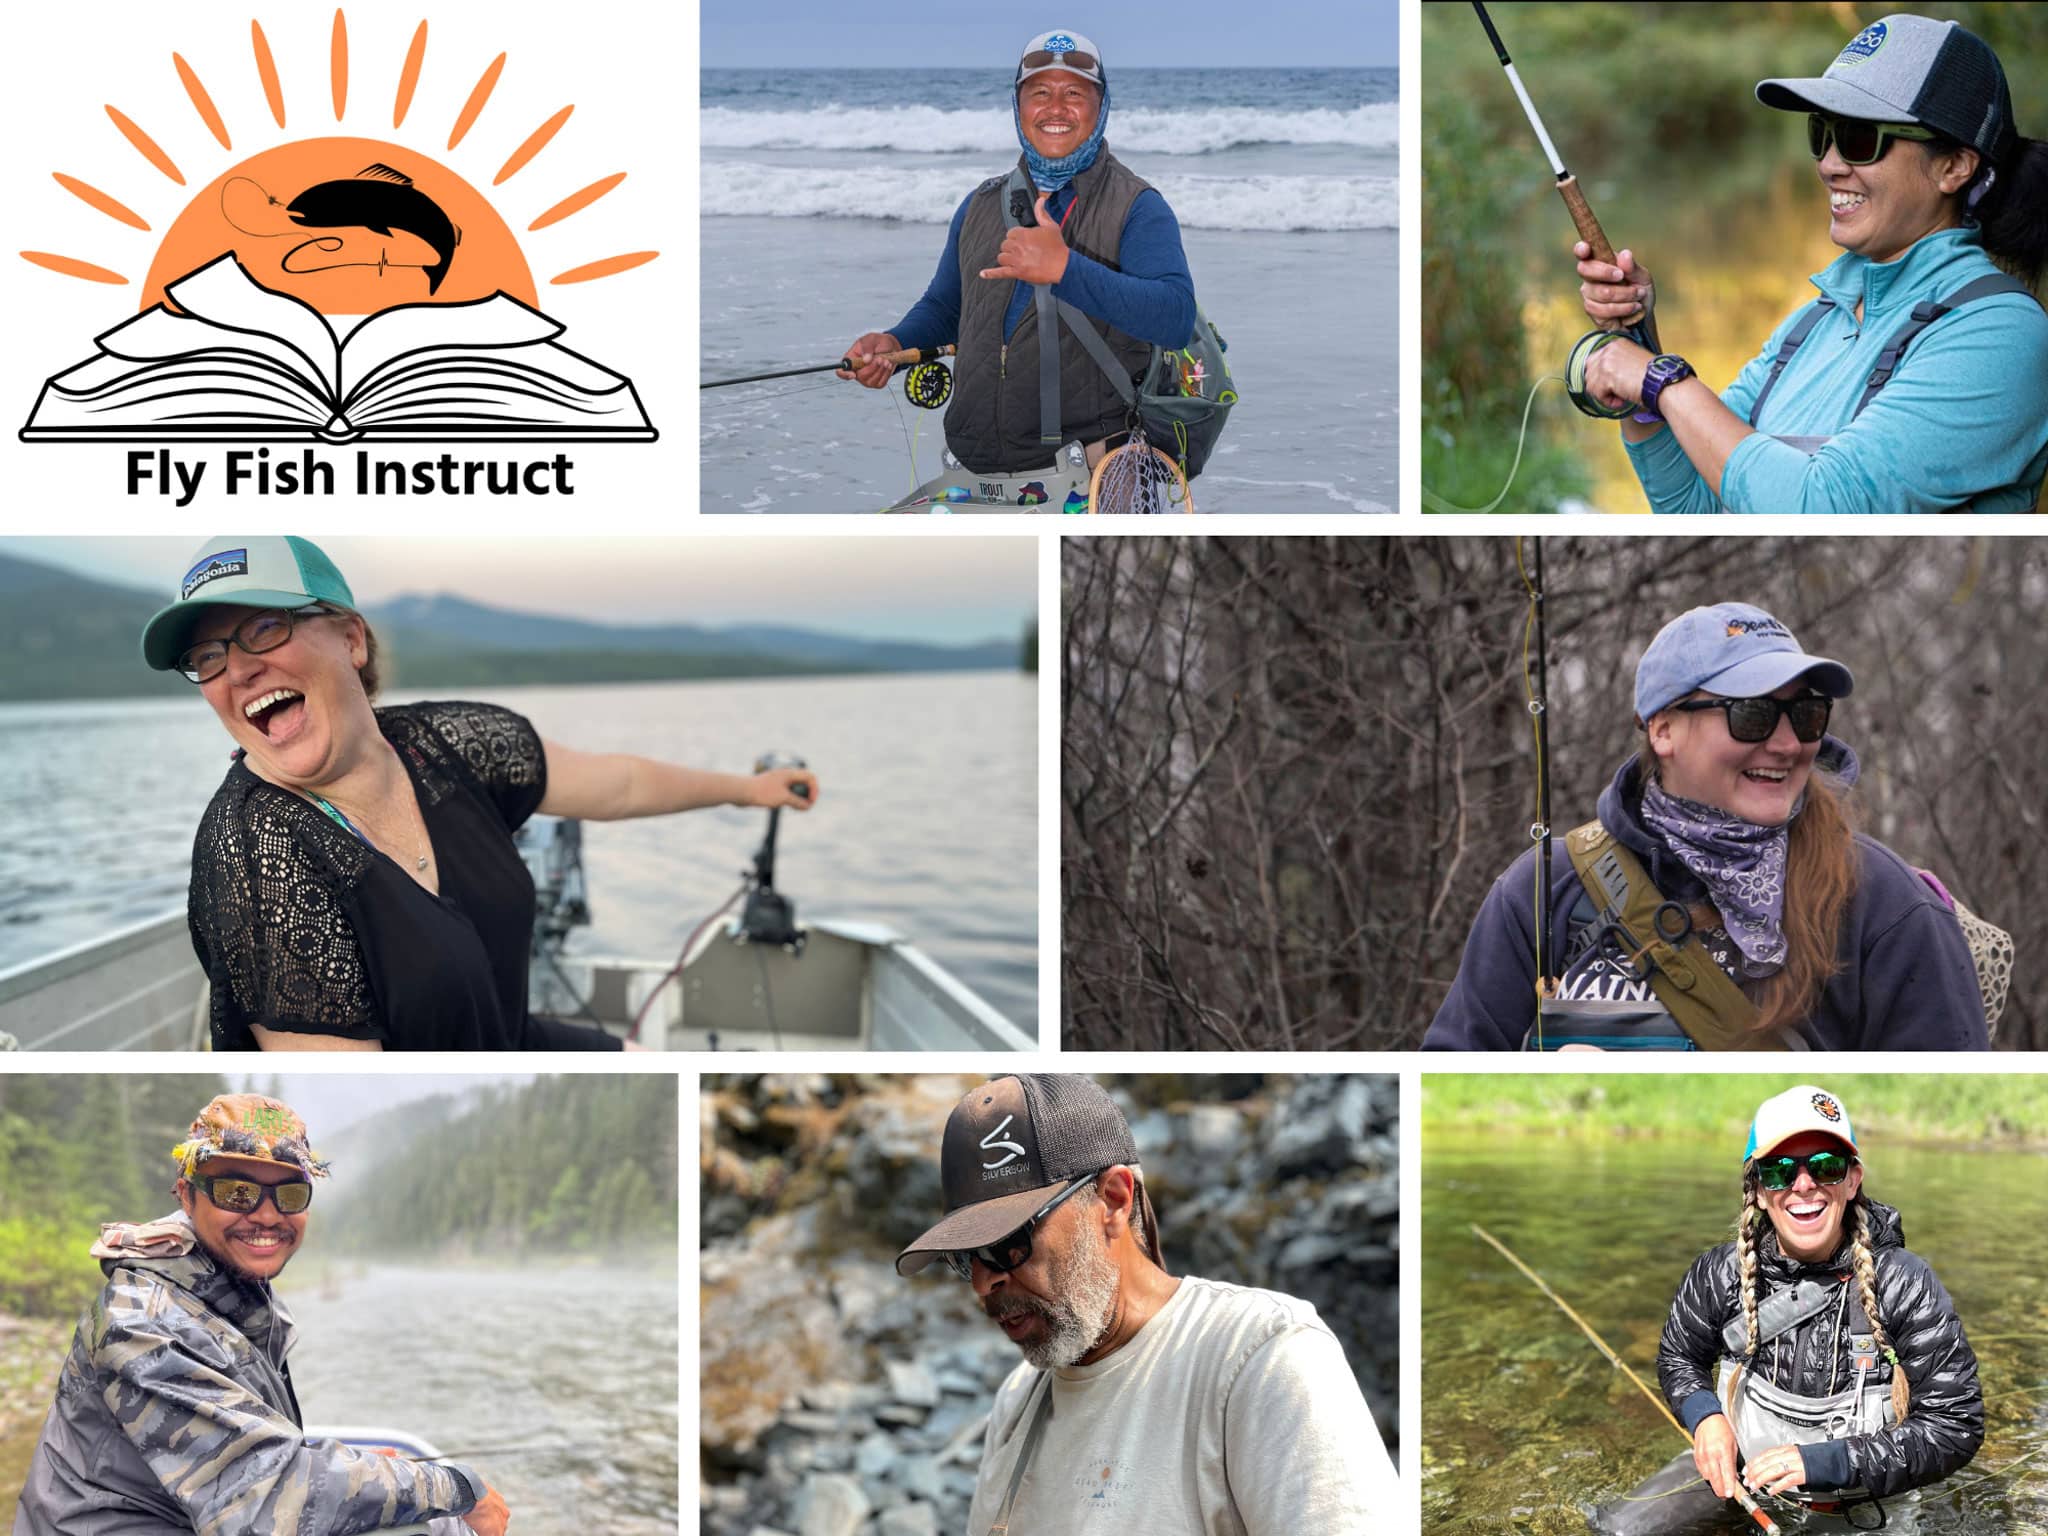 Fly Fishing Instructors - Diversity on the Water